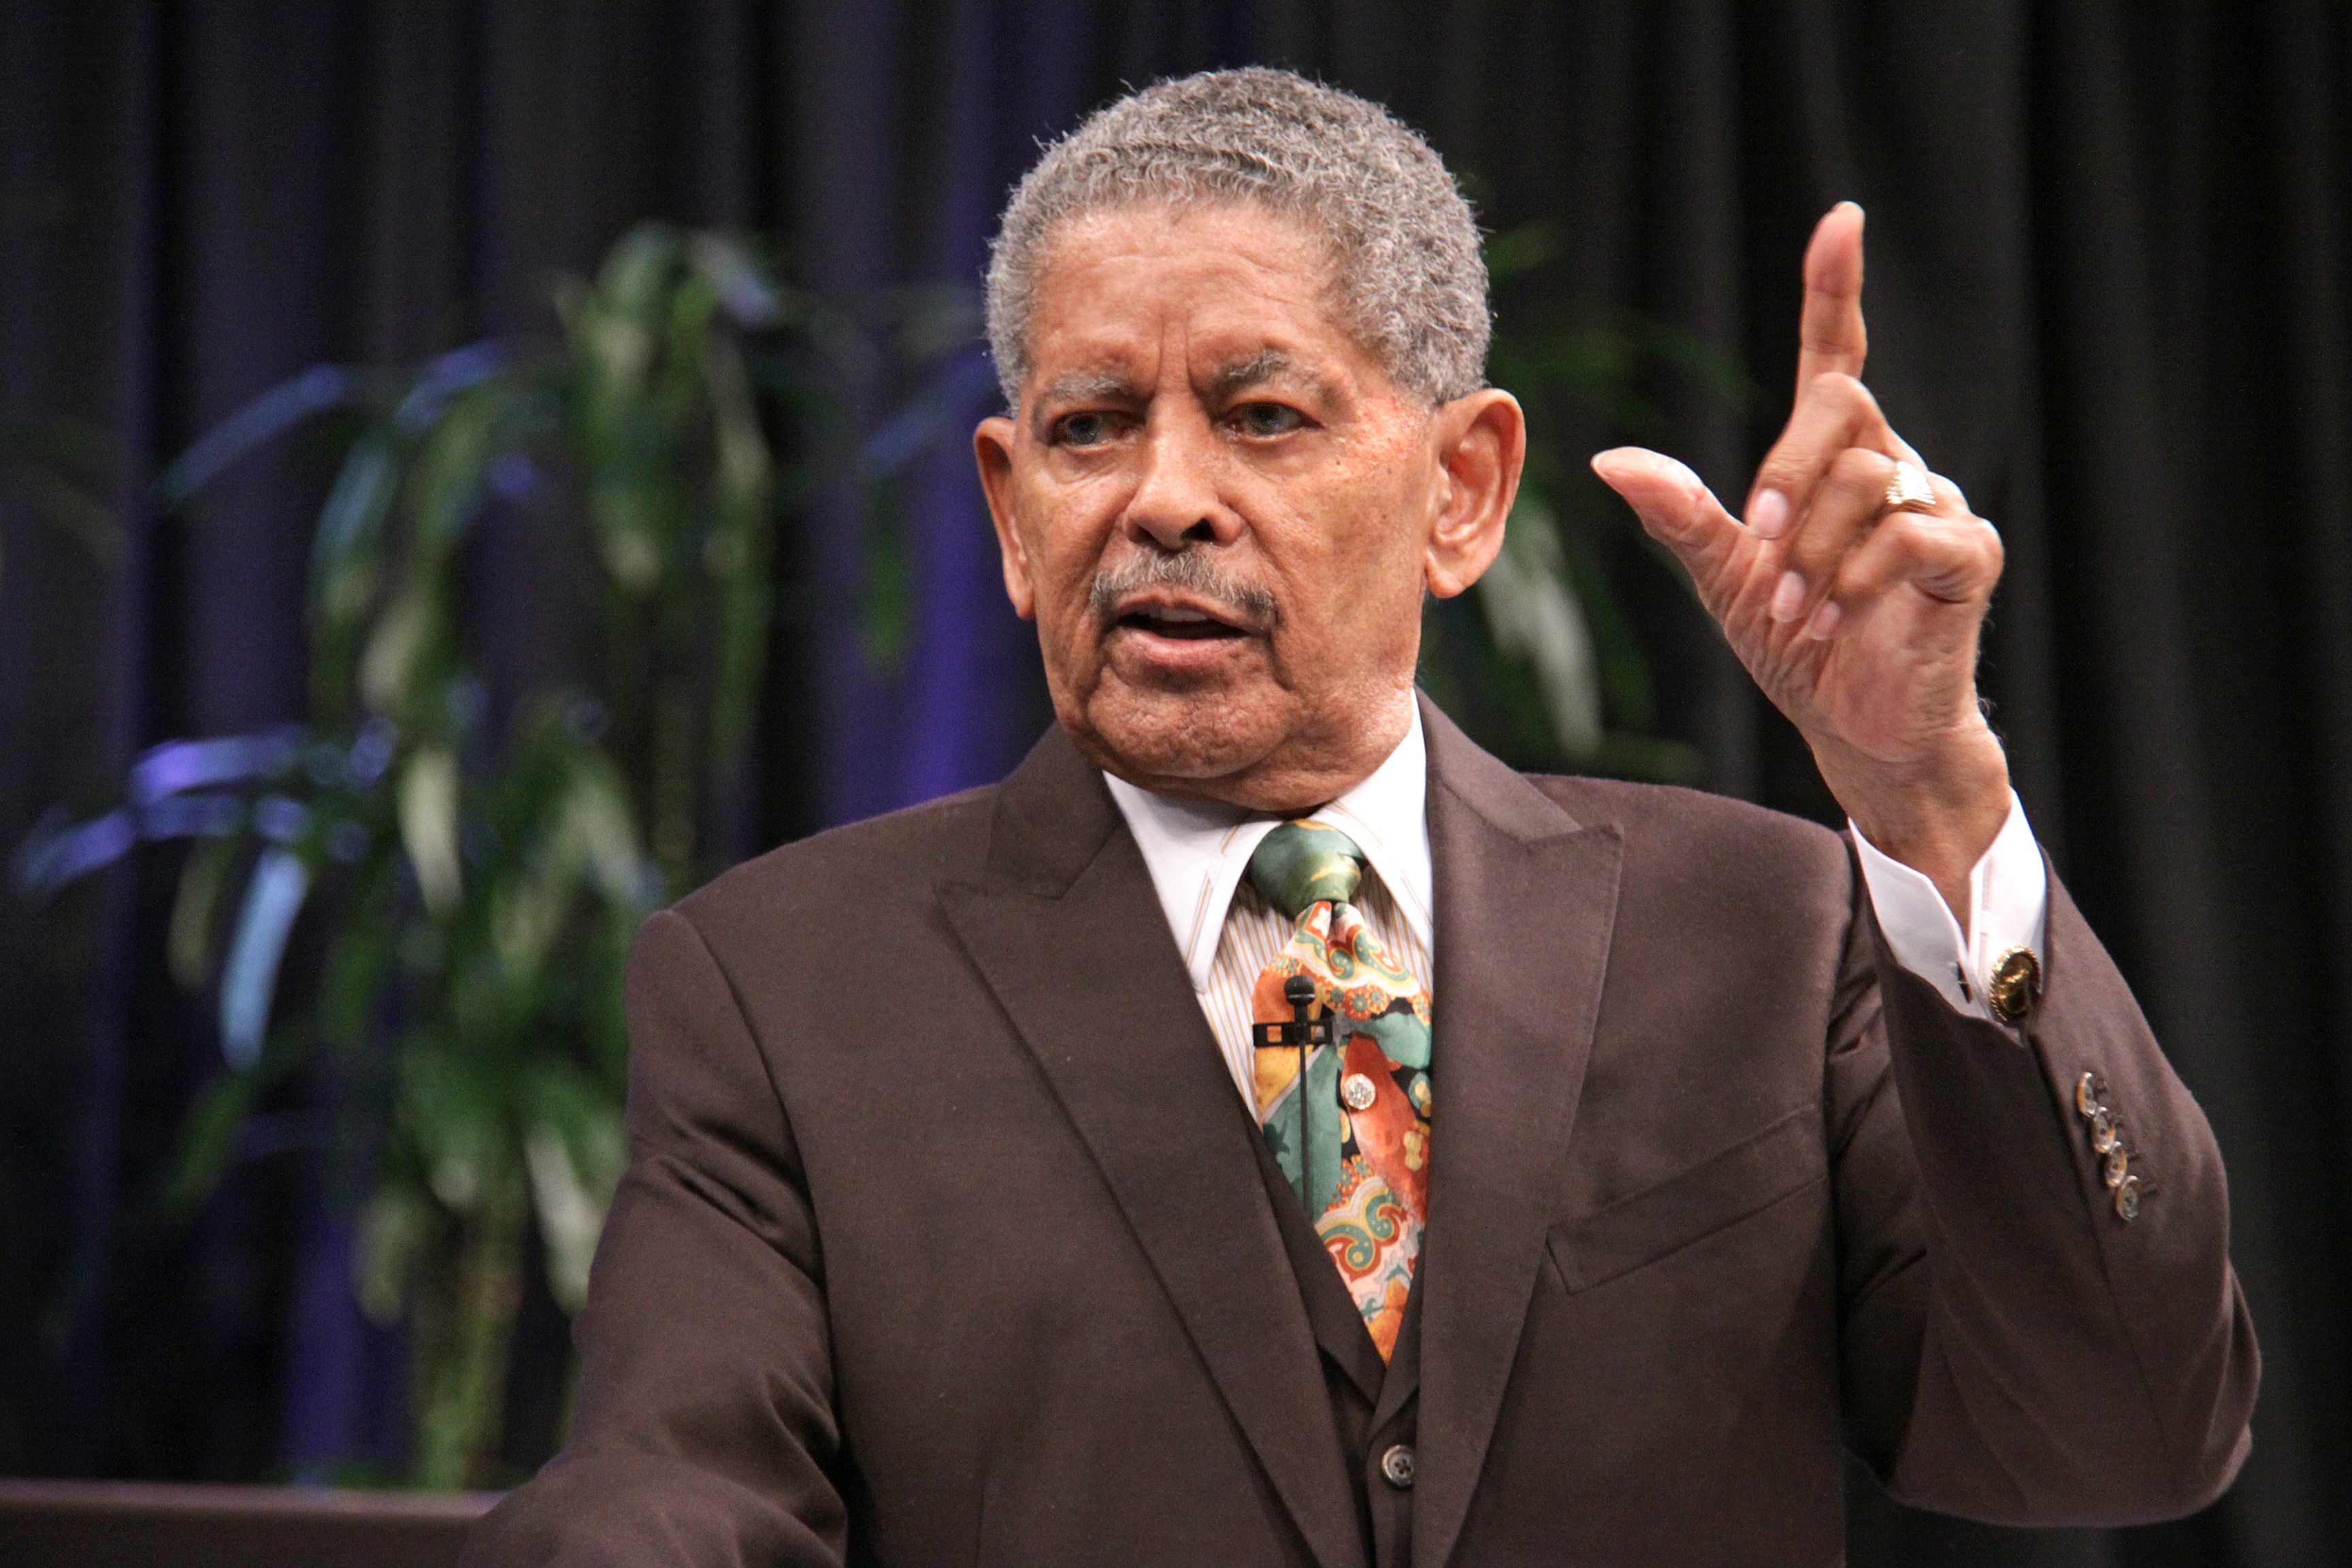 pastor fred price died